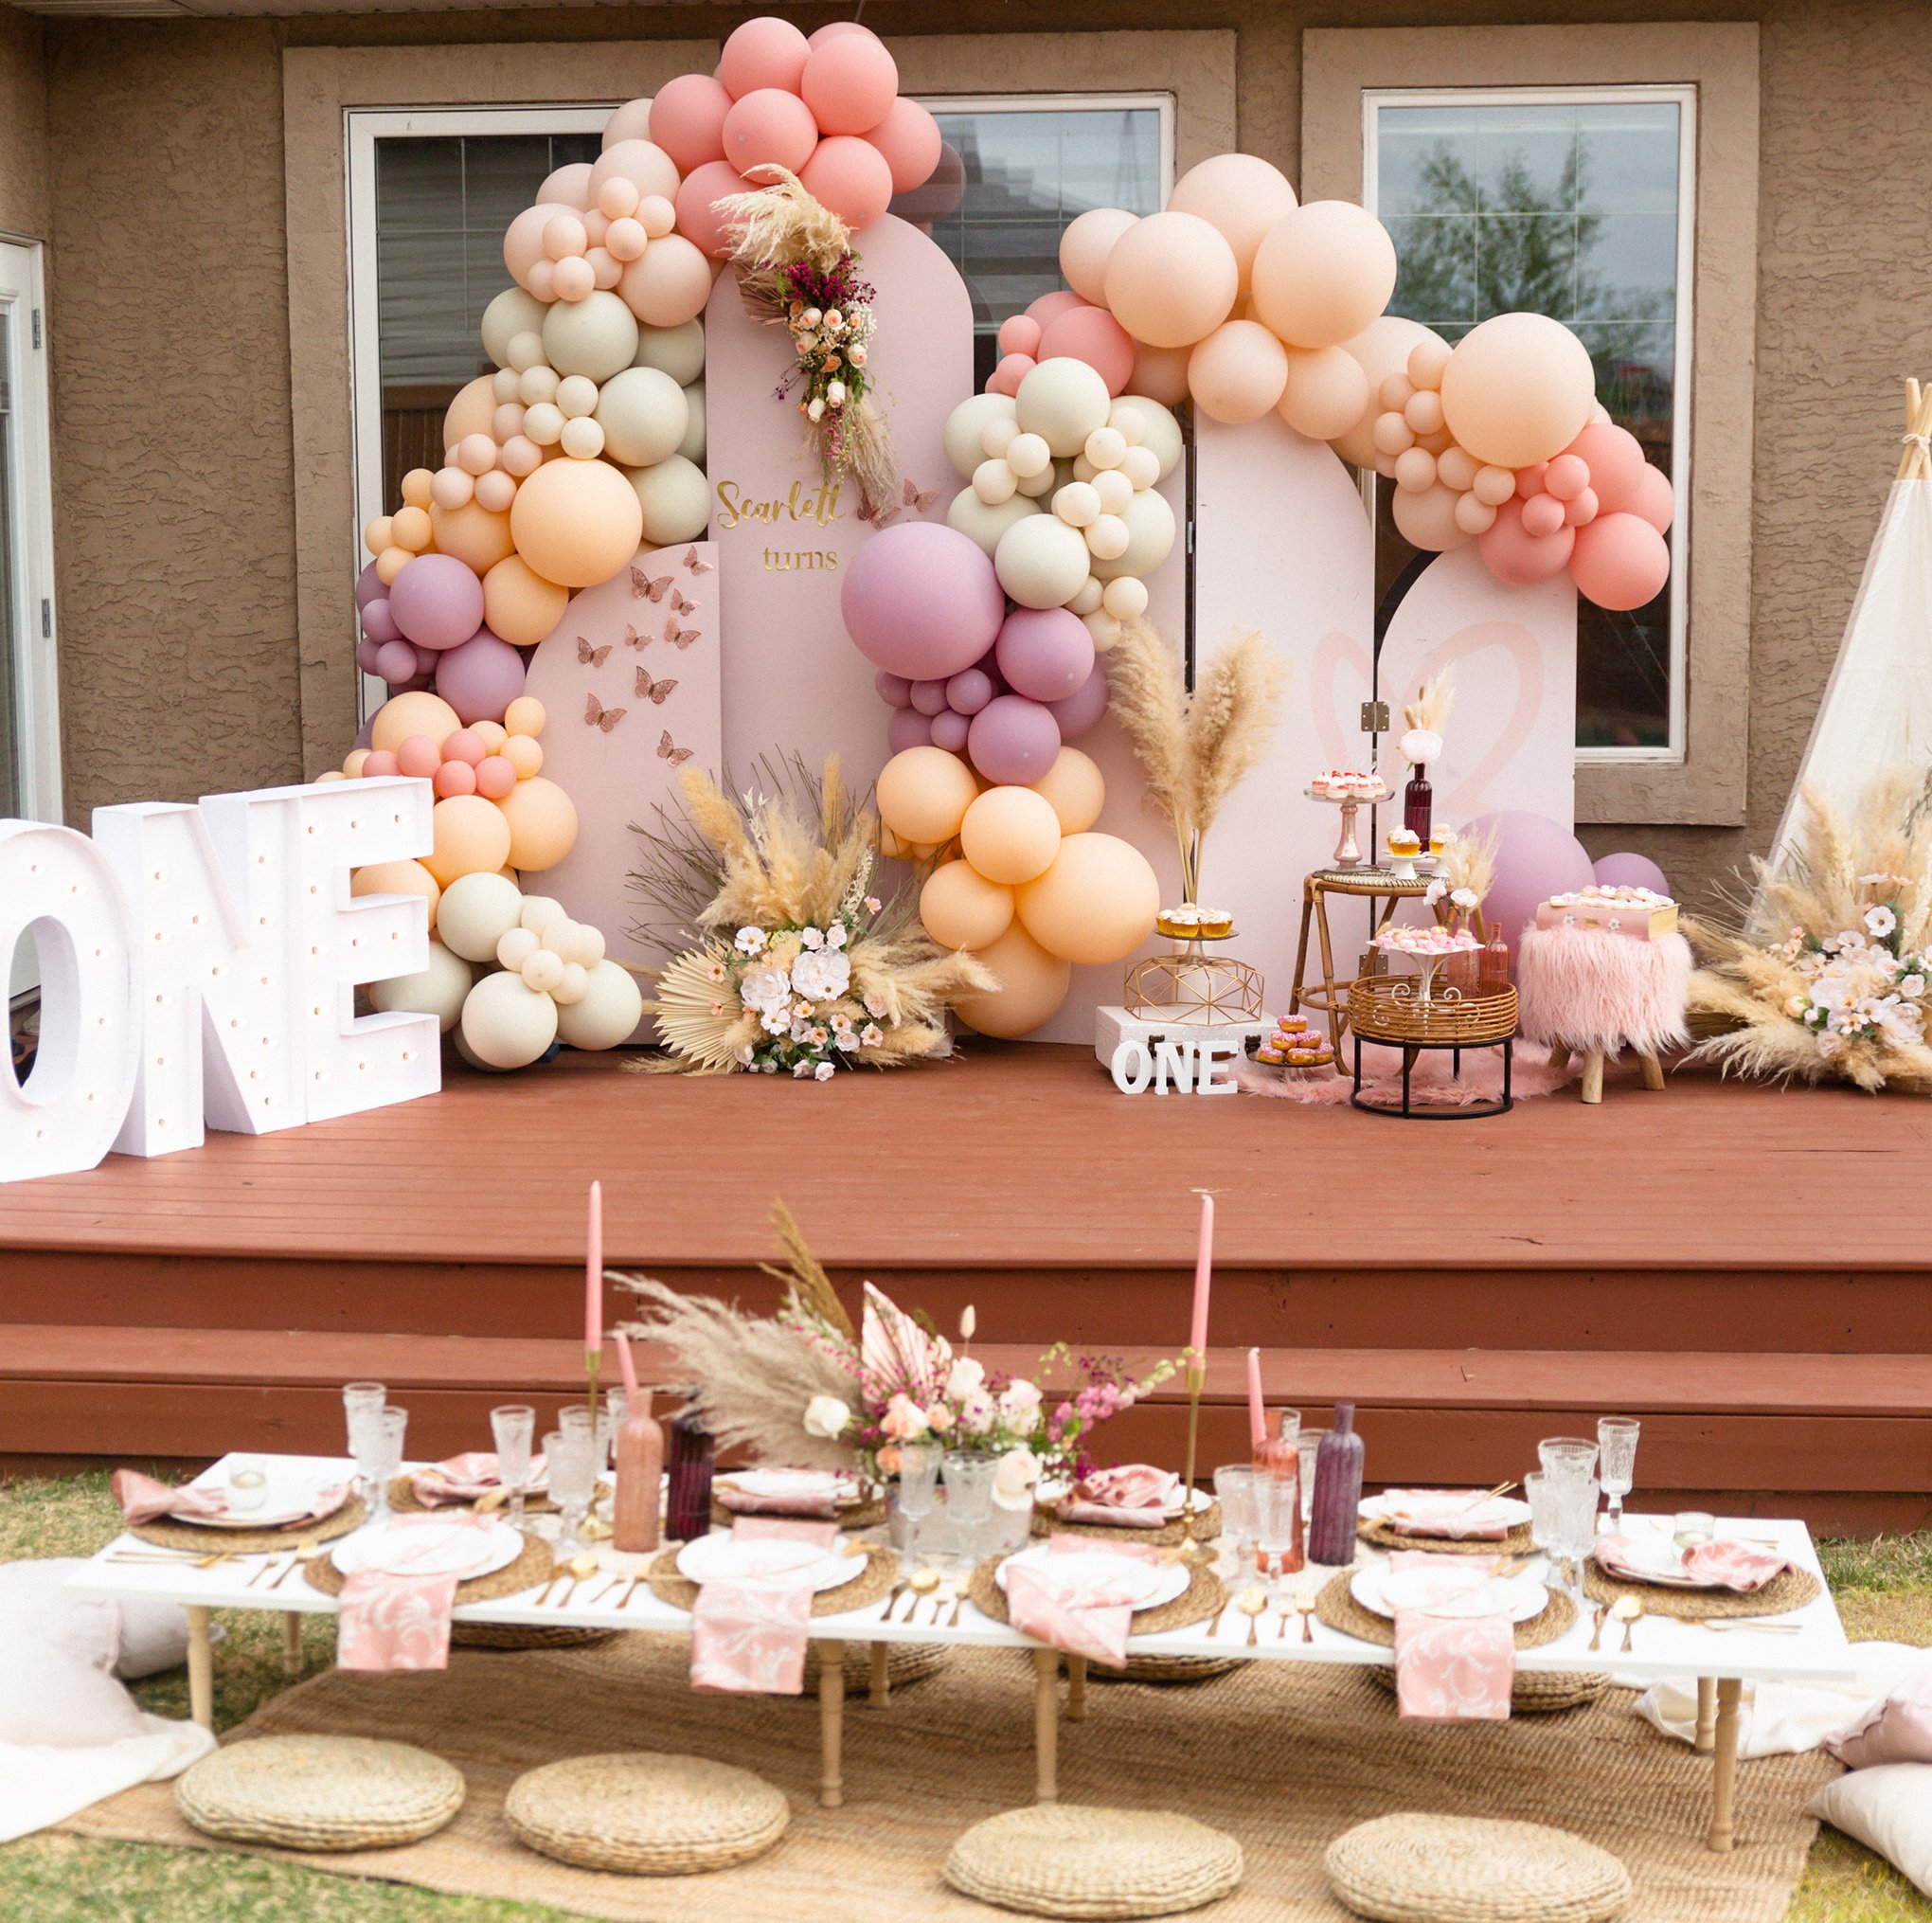 Easy Baby Shower Decorations - Playdates to Parties